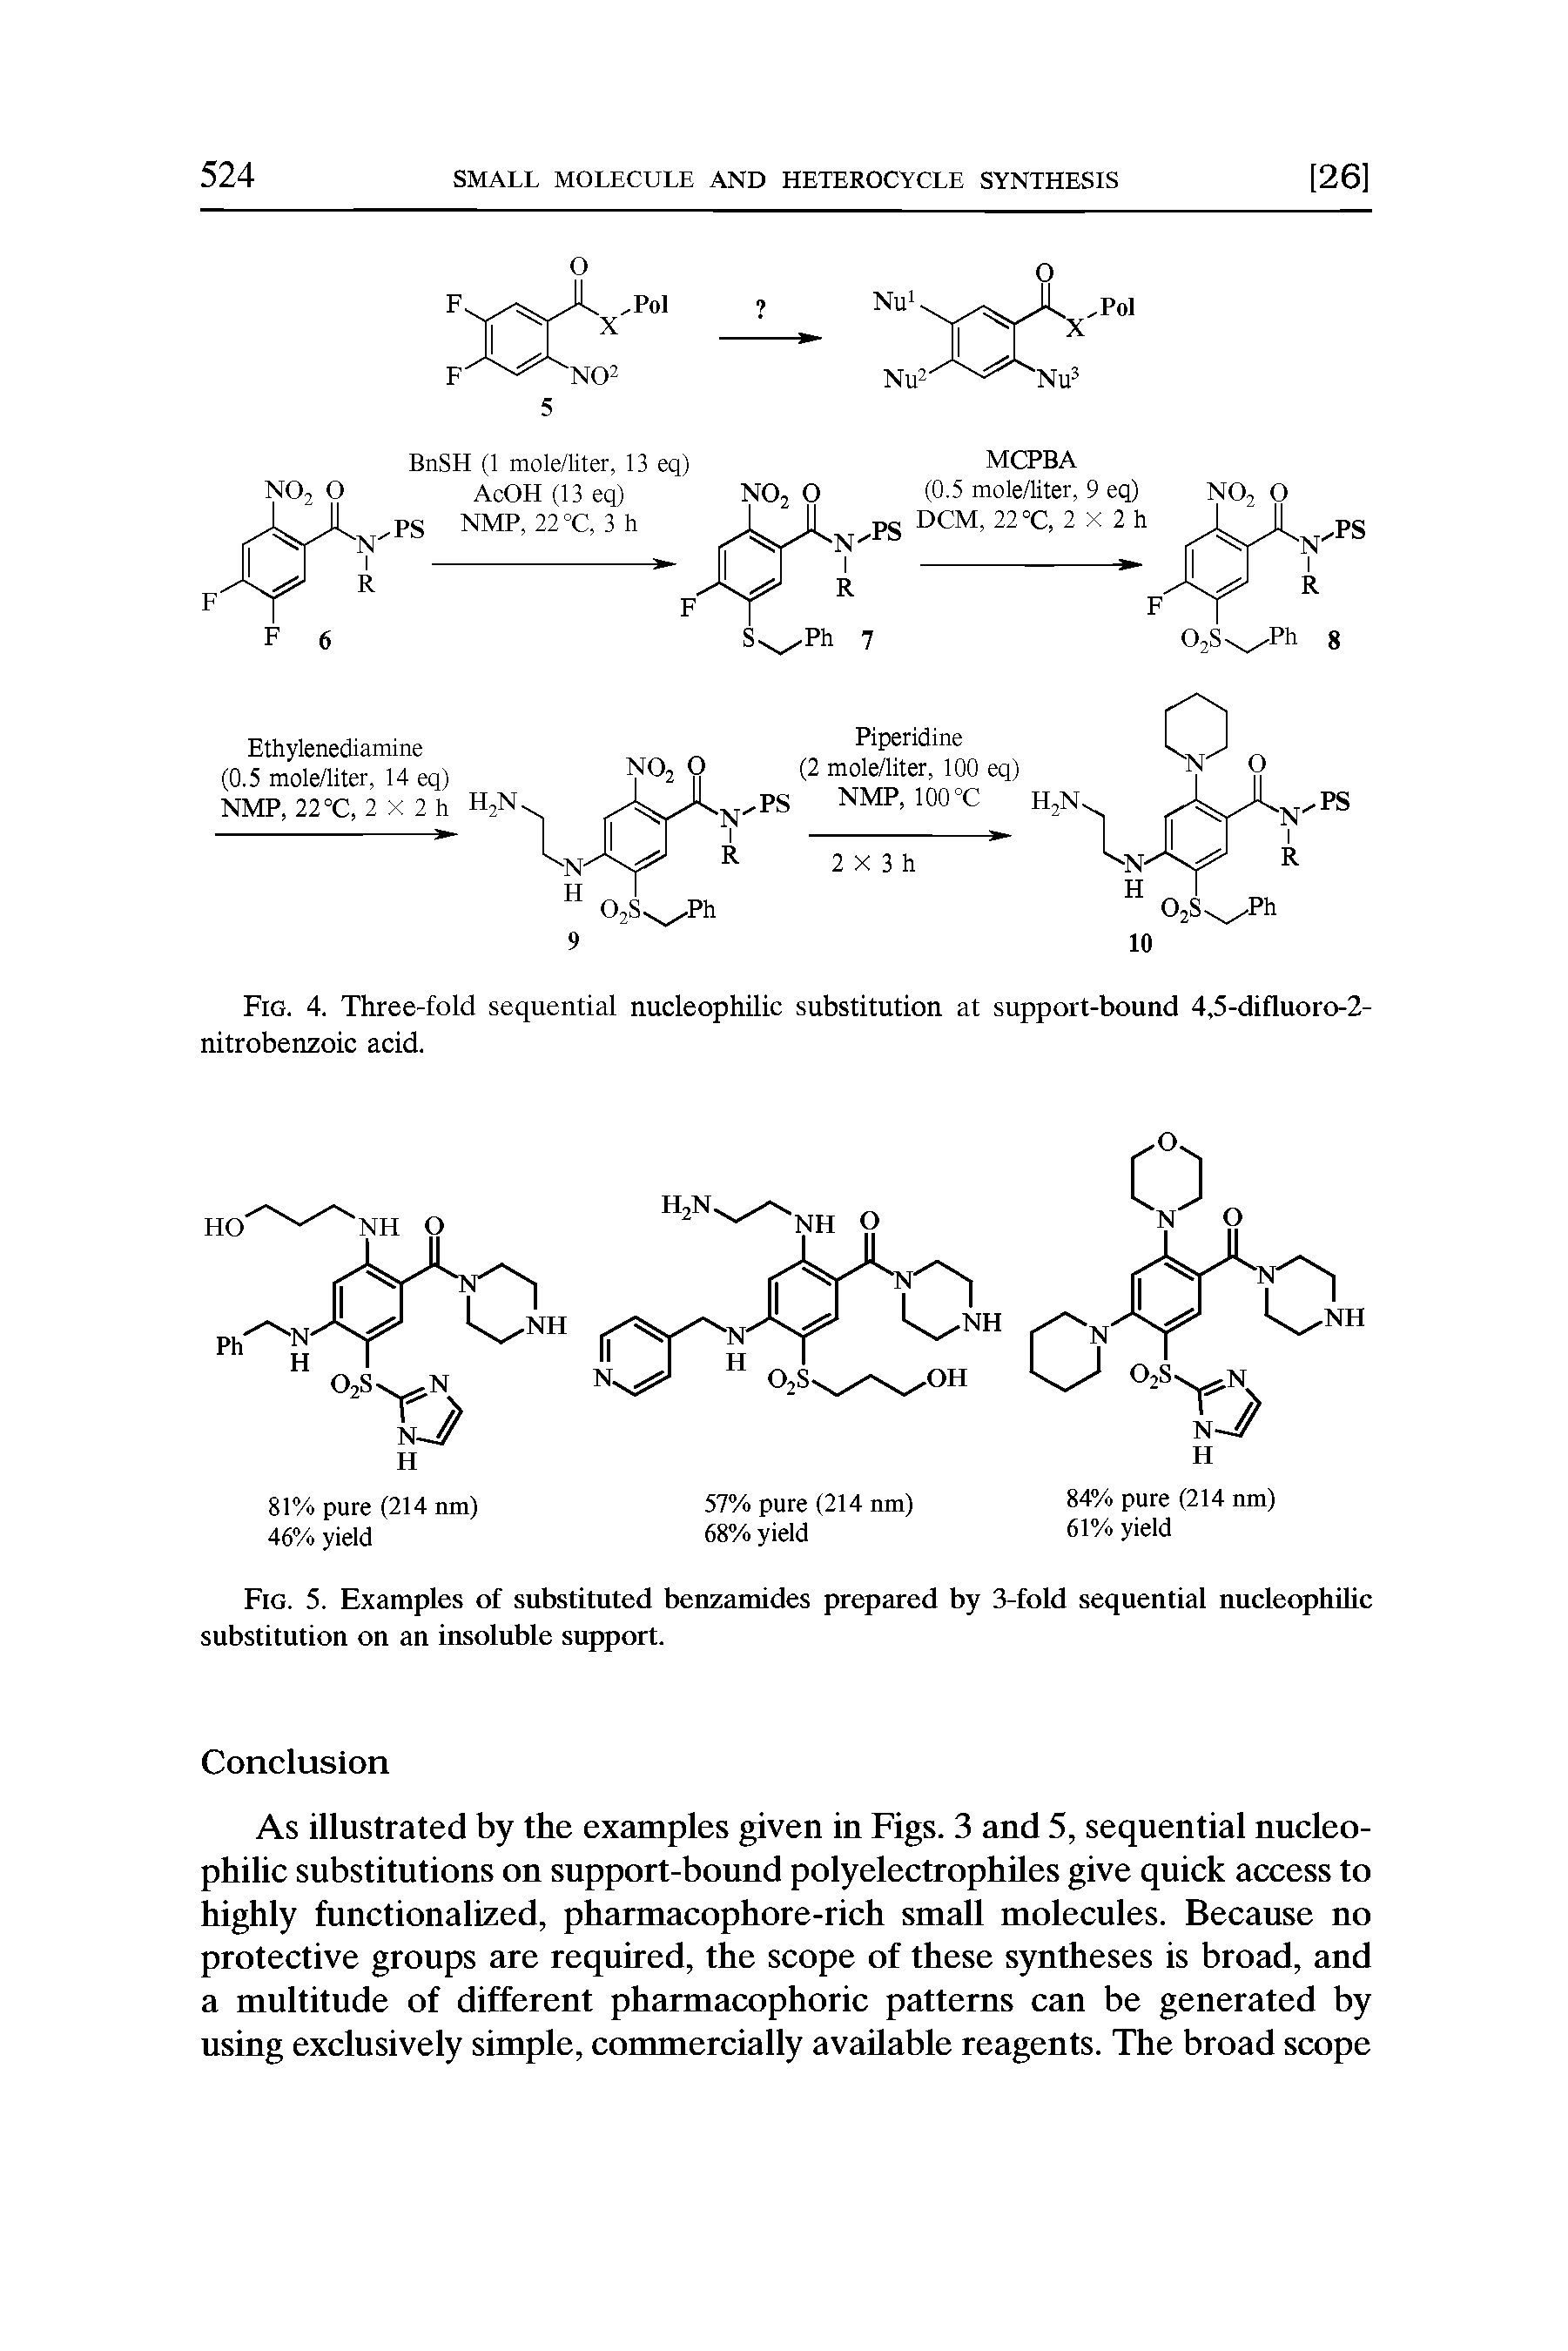 Fig. 5. Examples of substituted benzamides prepared by 3-fold sequential nucleophilic substitution on an insoluble support.